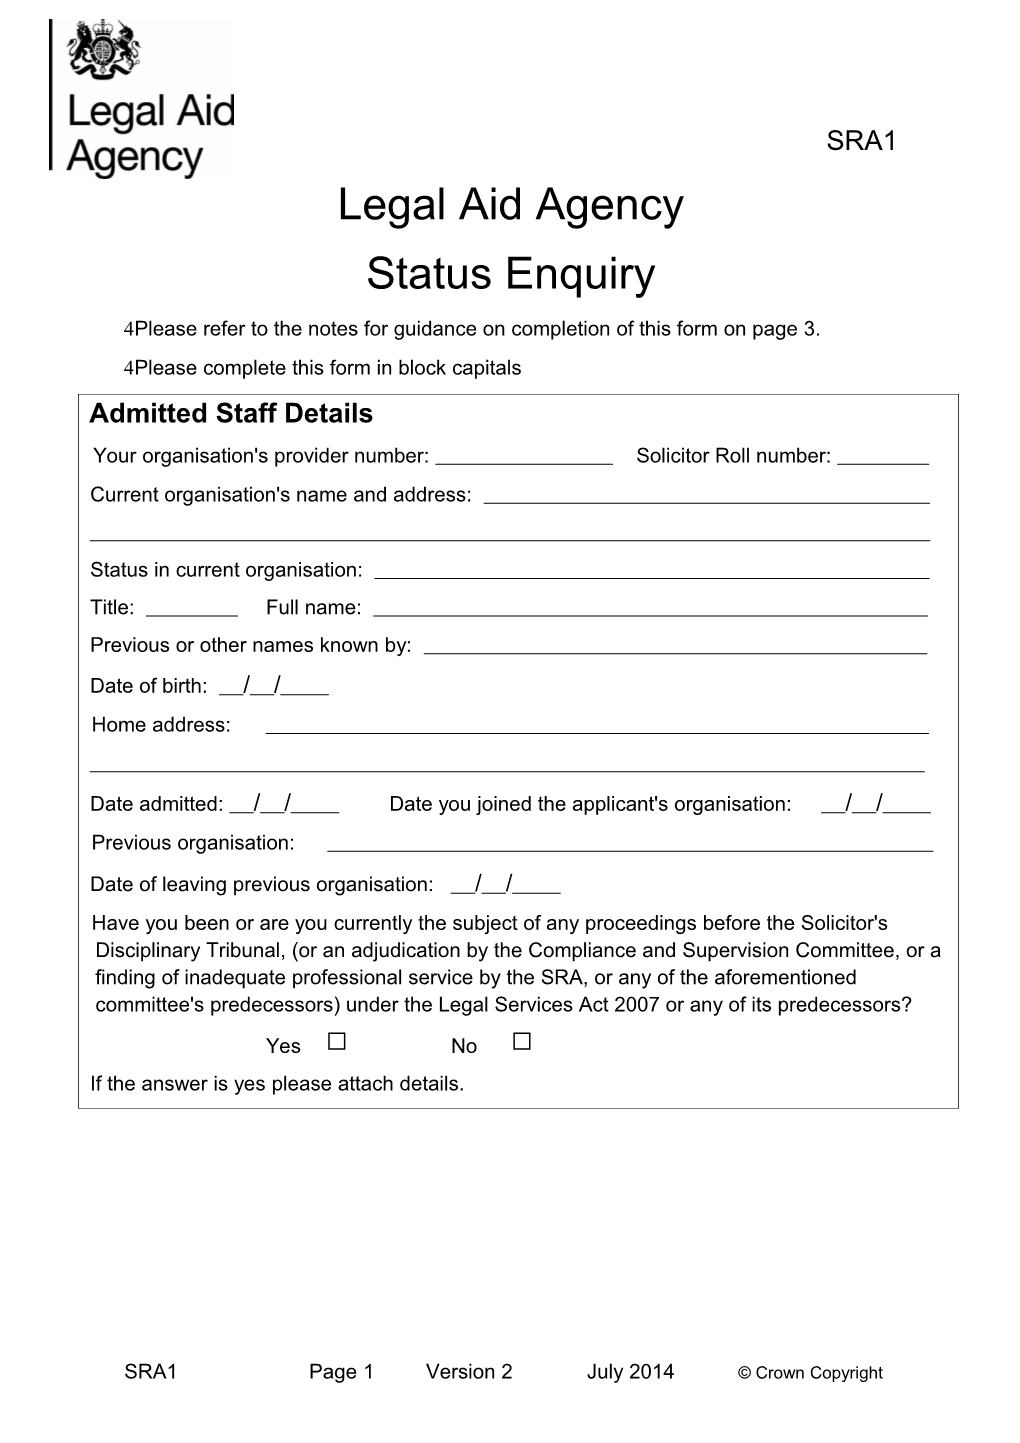 4Please Refer to the Notes for Guidance on Completion of This Form on Page 3